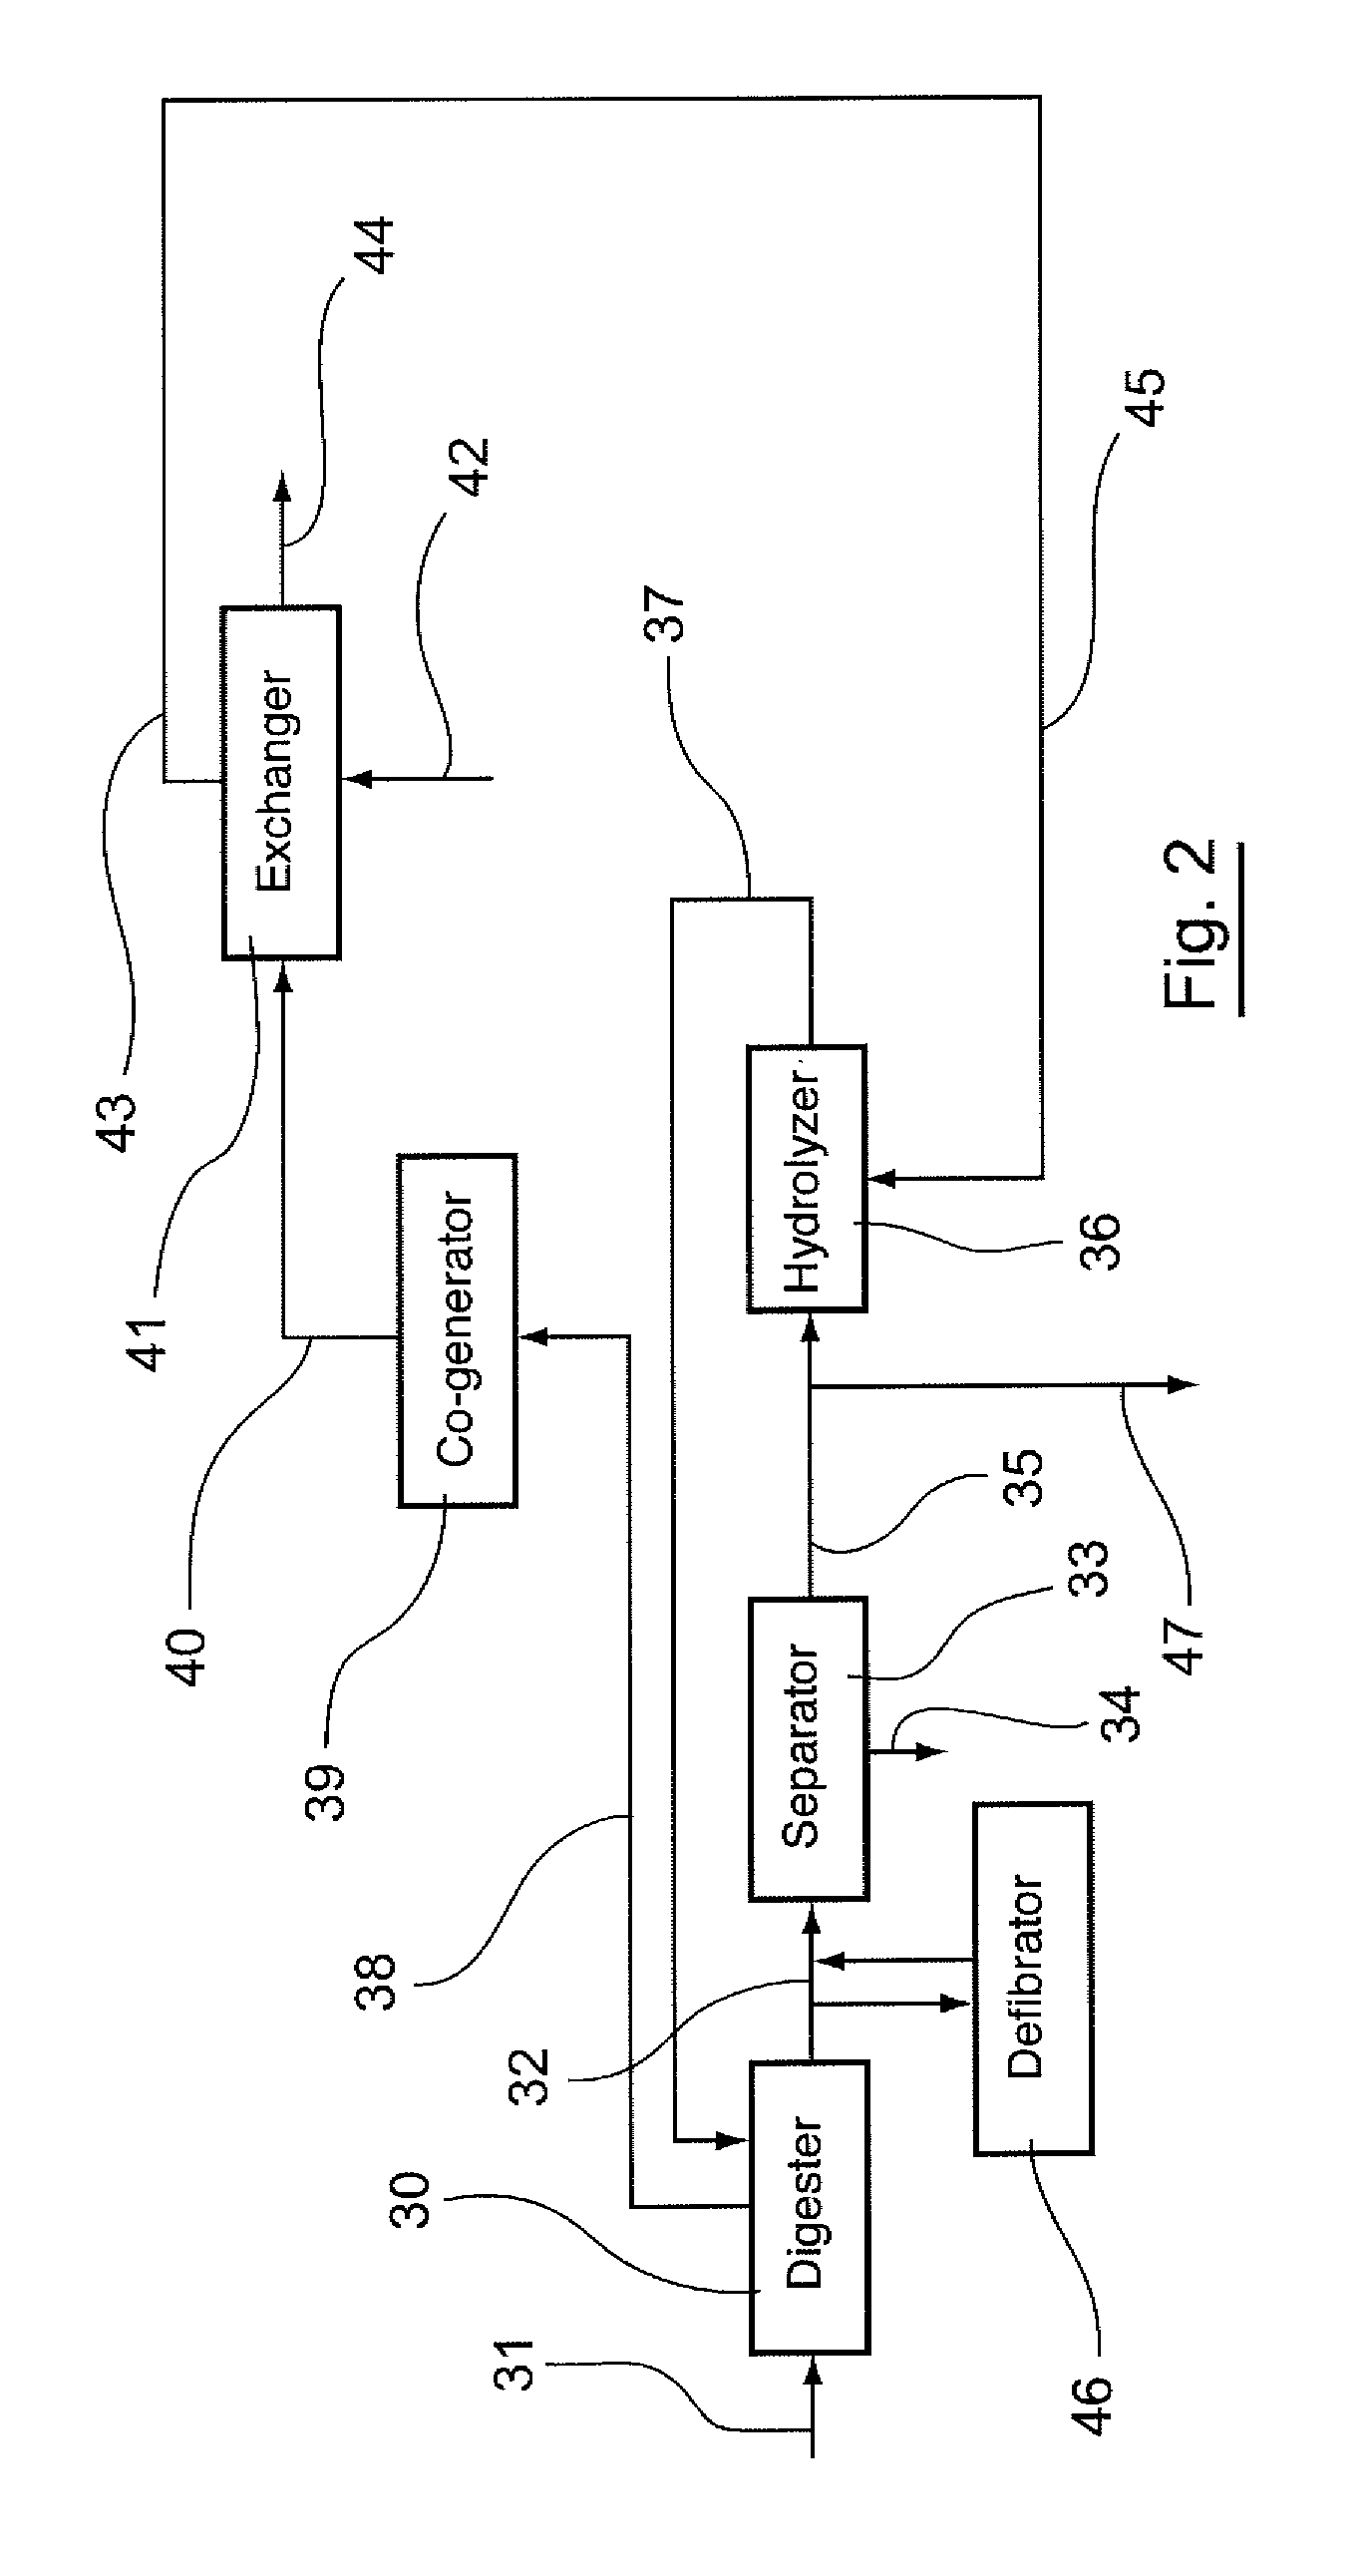 Method for Producing Non-Putrescible Sludge and Energy and Corresponding Plant